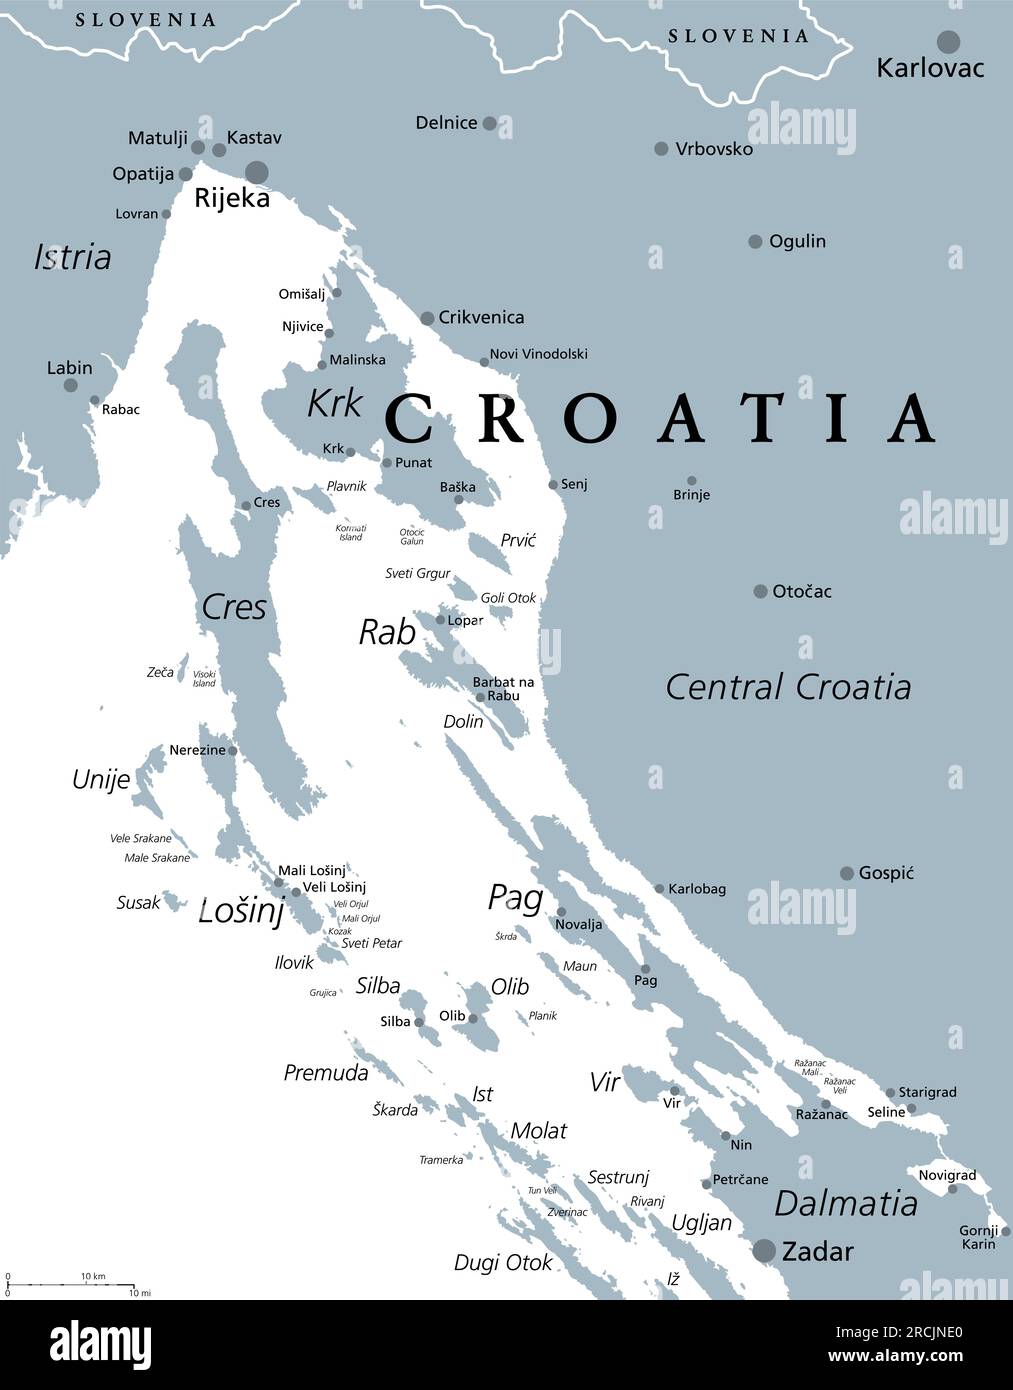 Kvarner Gulf, part of internal waters of Croatia, gray political map. The Kvarner Bay in the northern Adriatic Sea between Istria and Central Croatia. Stock Photo